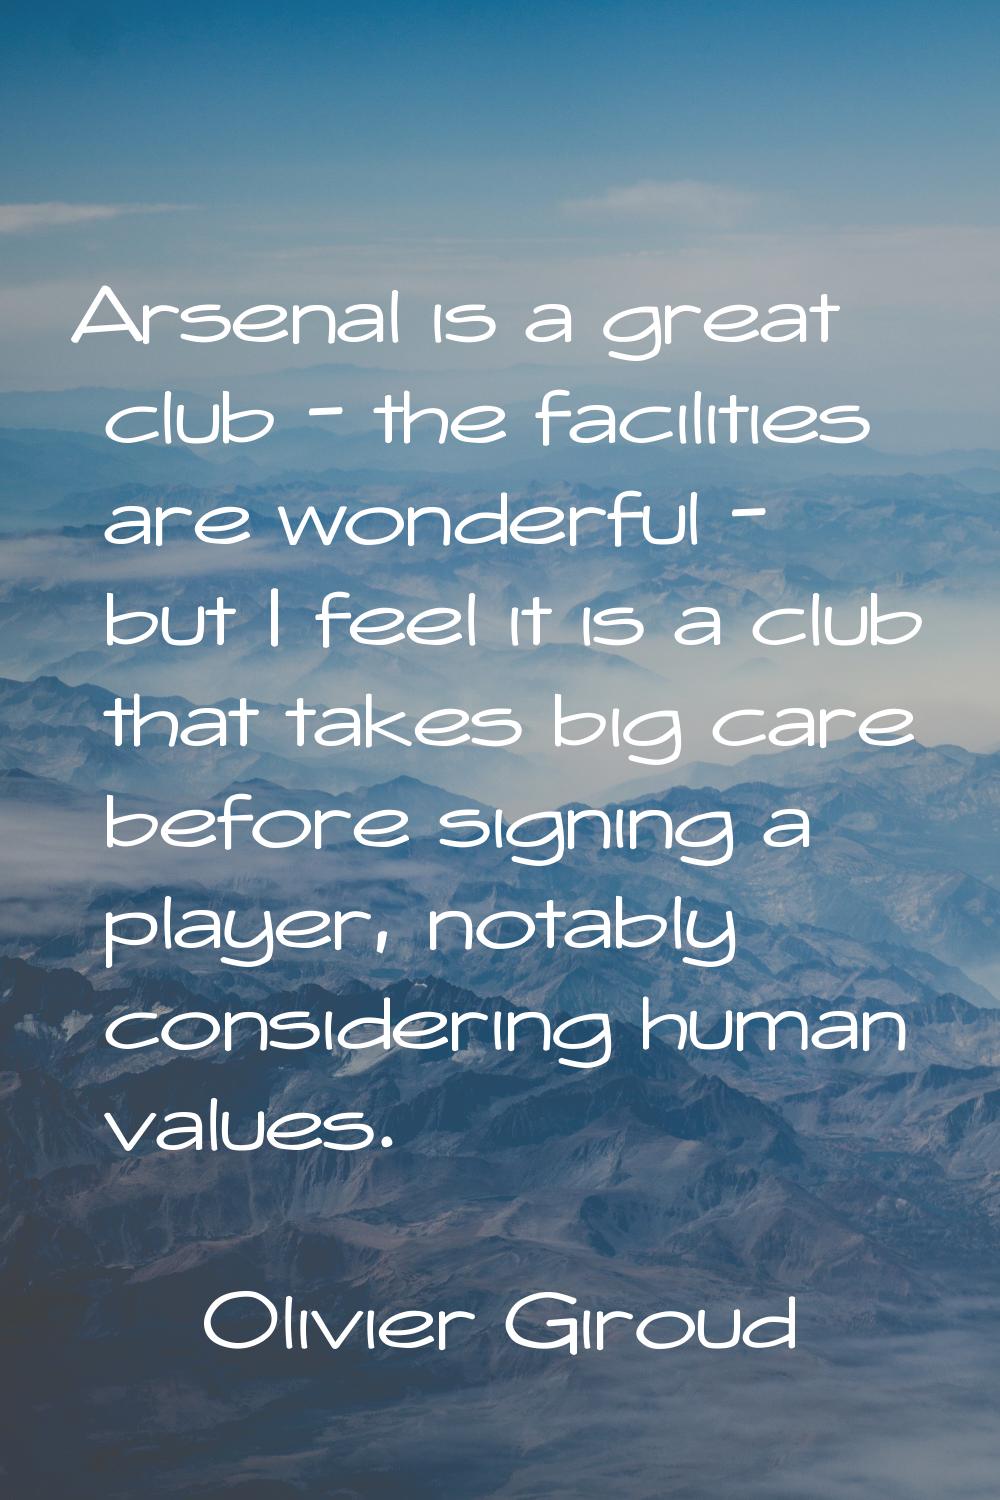 Arsenal is a great club - the facilities are wonderful - but I feel it is a club that takes big car